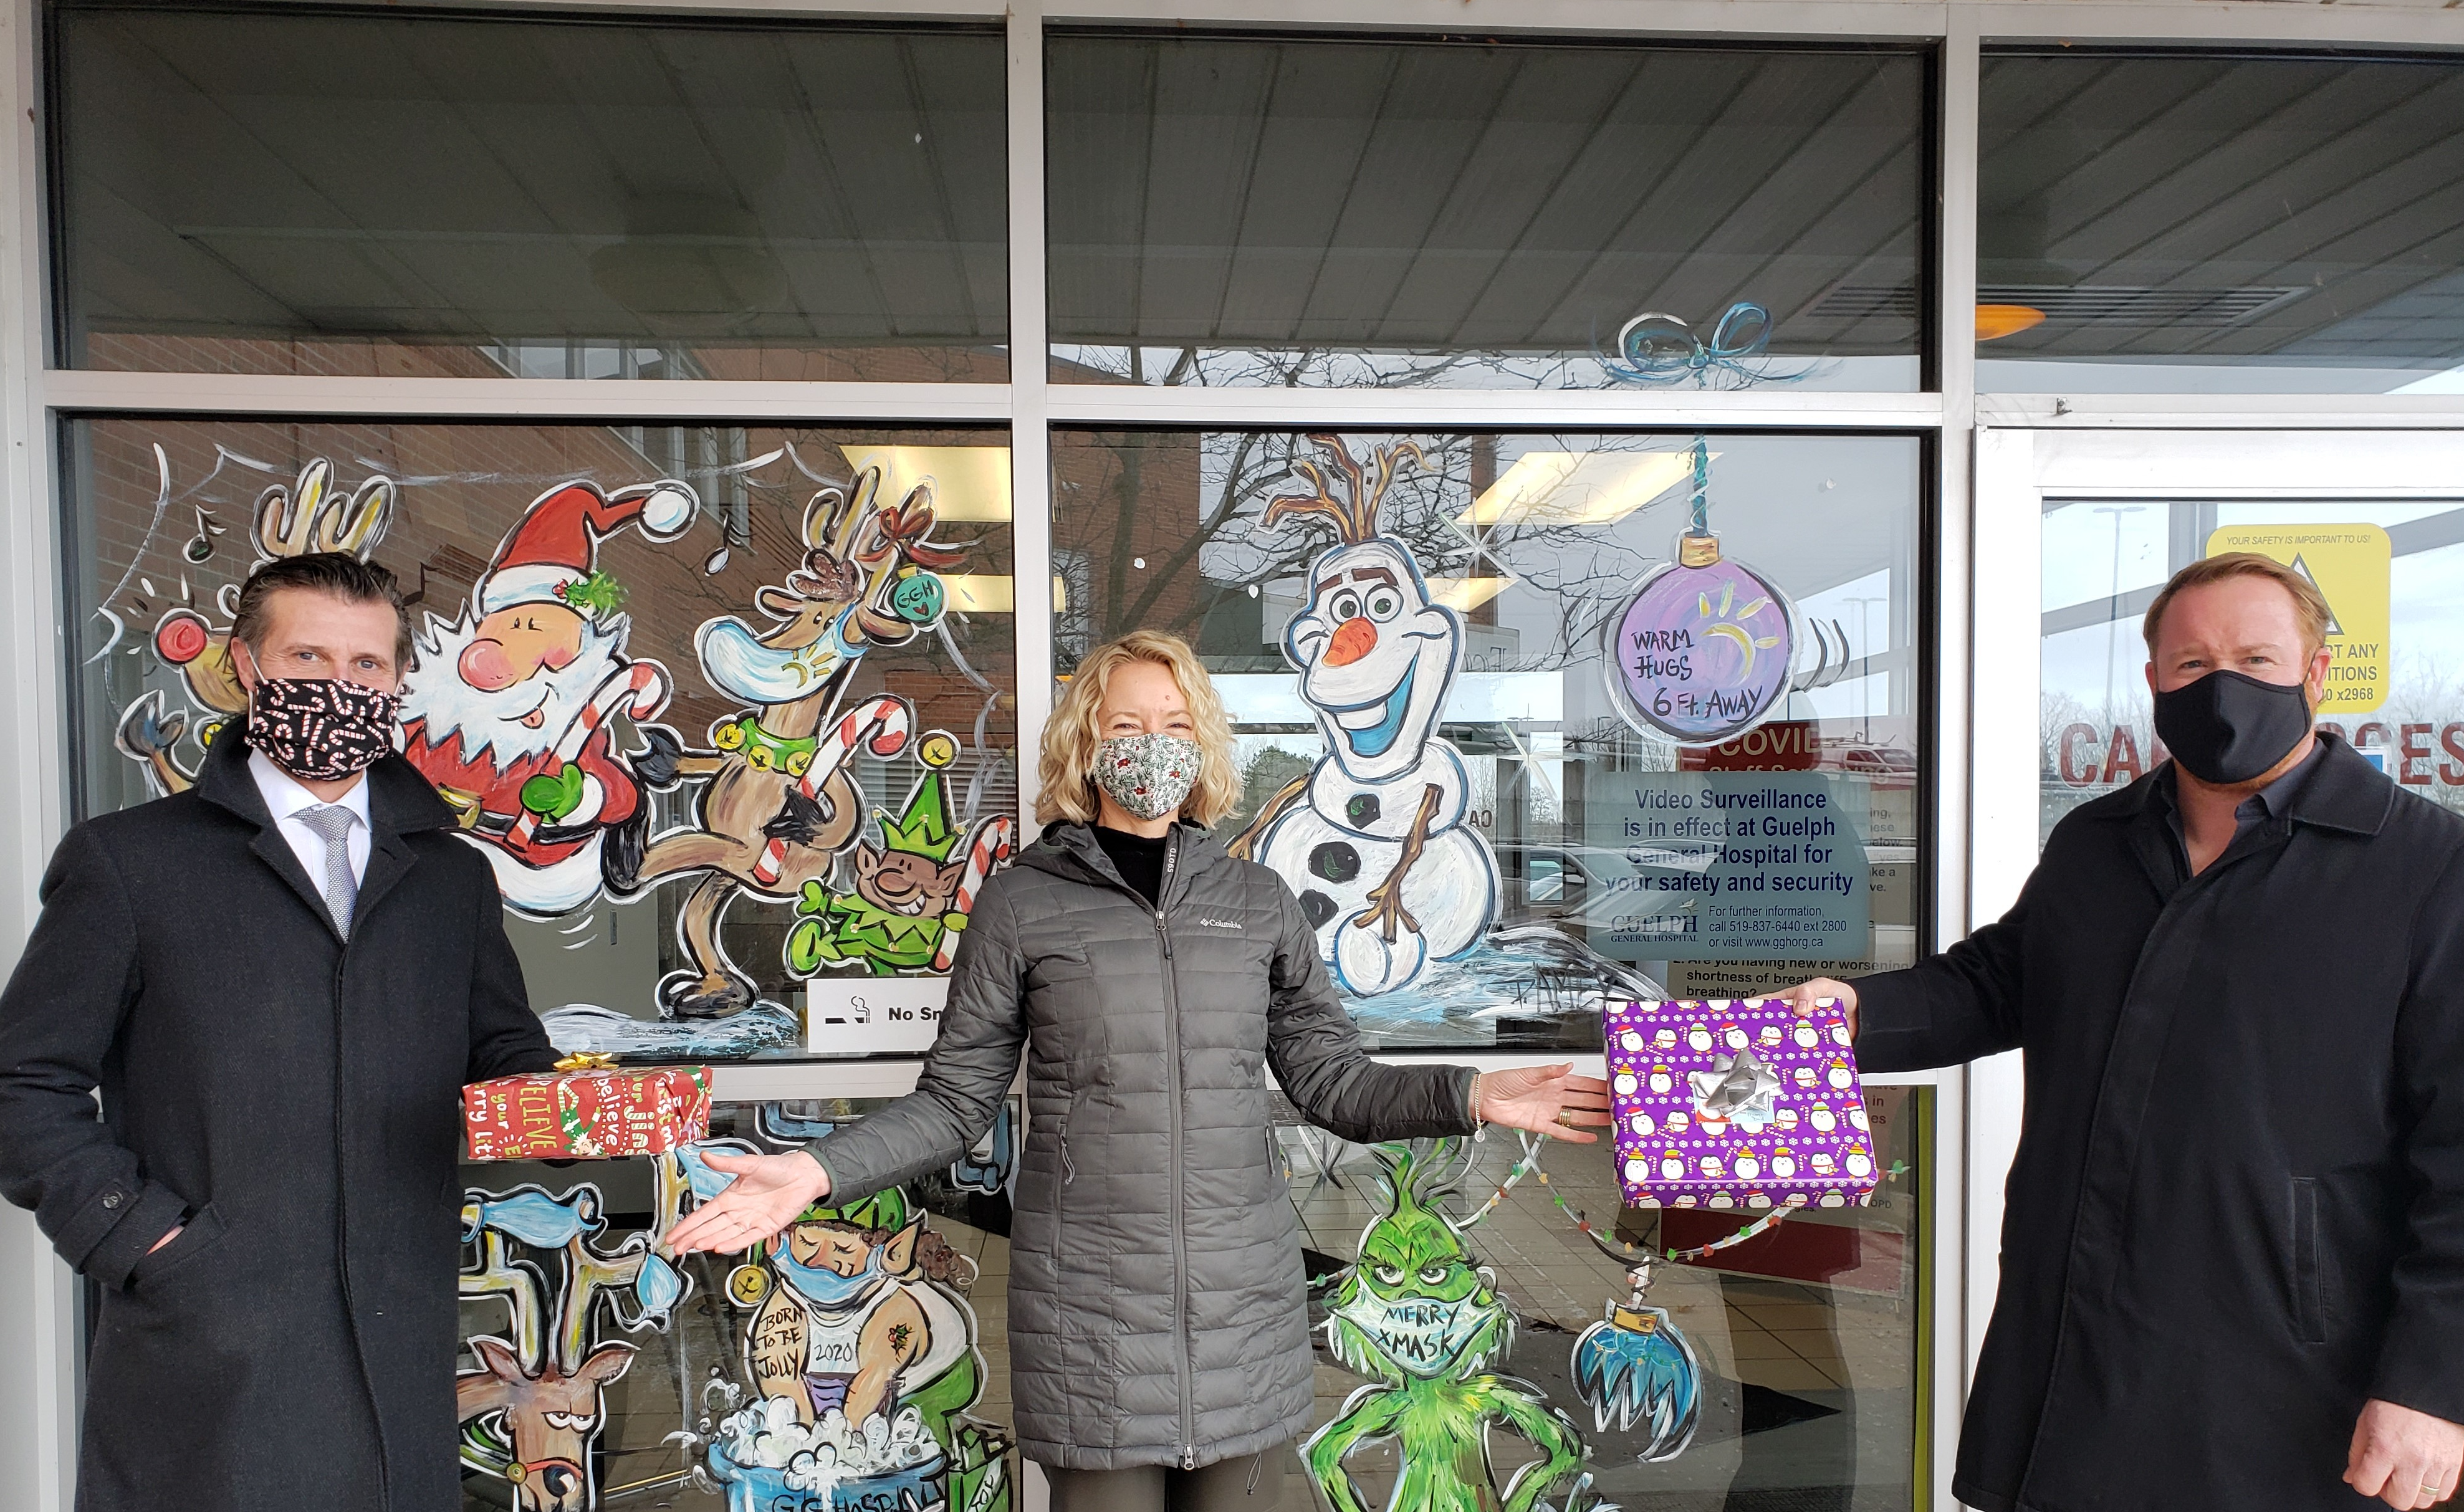 Two men and one woman standing in front of a holiday decorated window. The men are handing the woman wrapped presents.